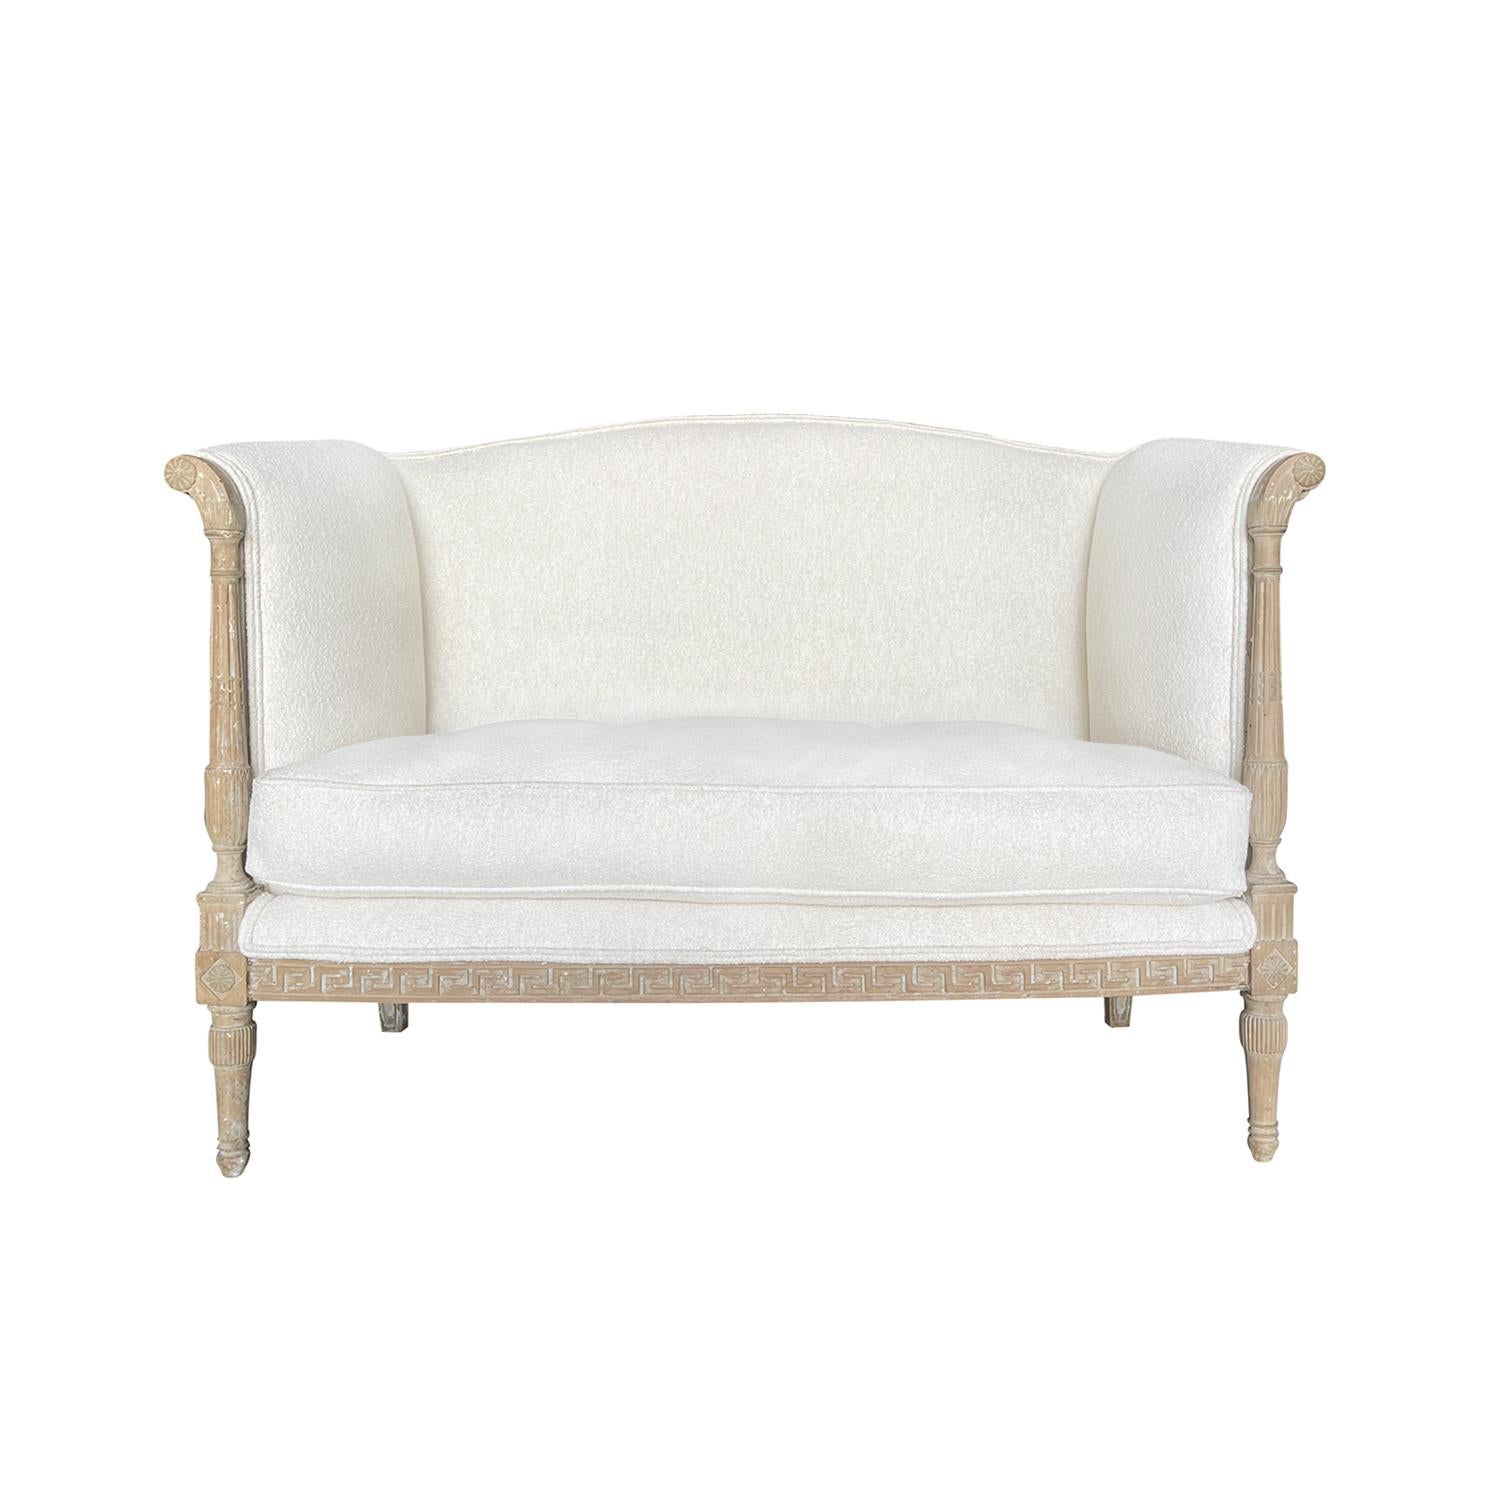 Late 18th Century, an exceptional original Directoire settee from France, in good condition. The hand scraped wood frame of the French period canape has the original patina. Hand crafted in Beechwood with a gracious flower décor, rosettes. A